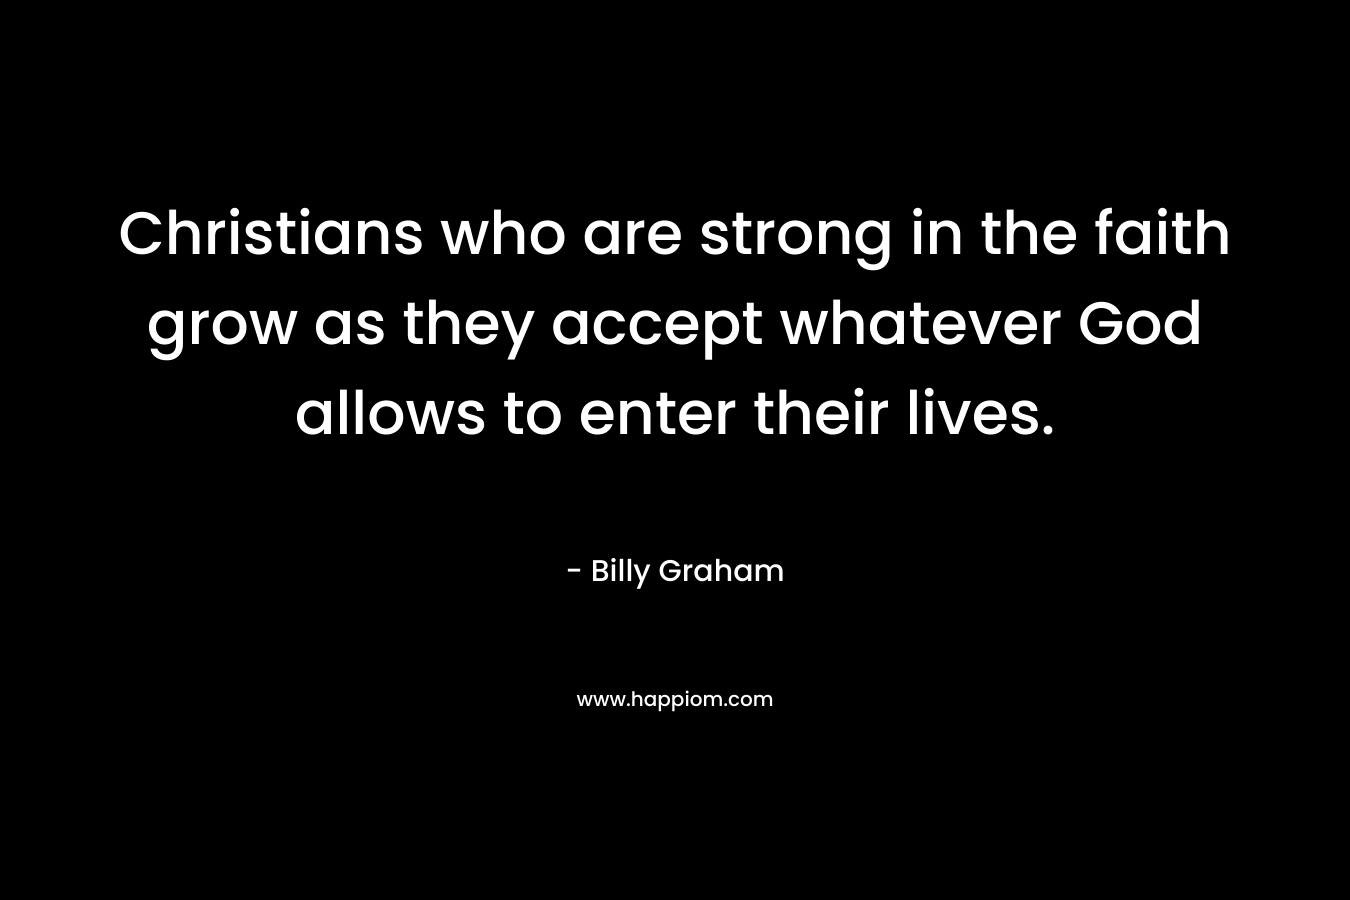 Christians who are strong in the faith grow as they accept whatever God allows to enter their lives.